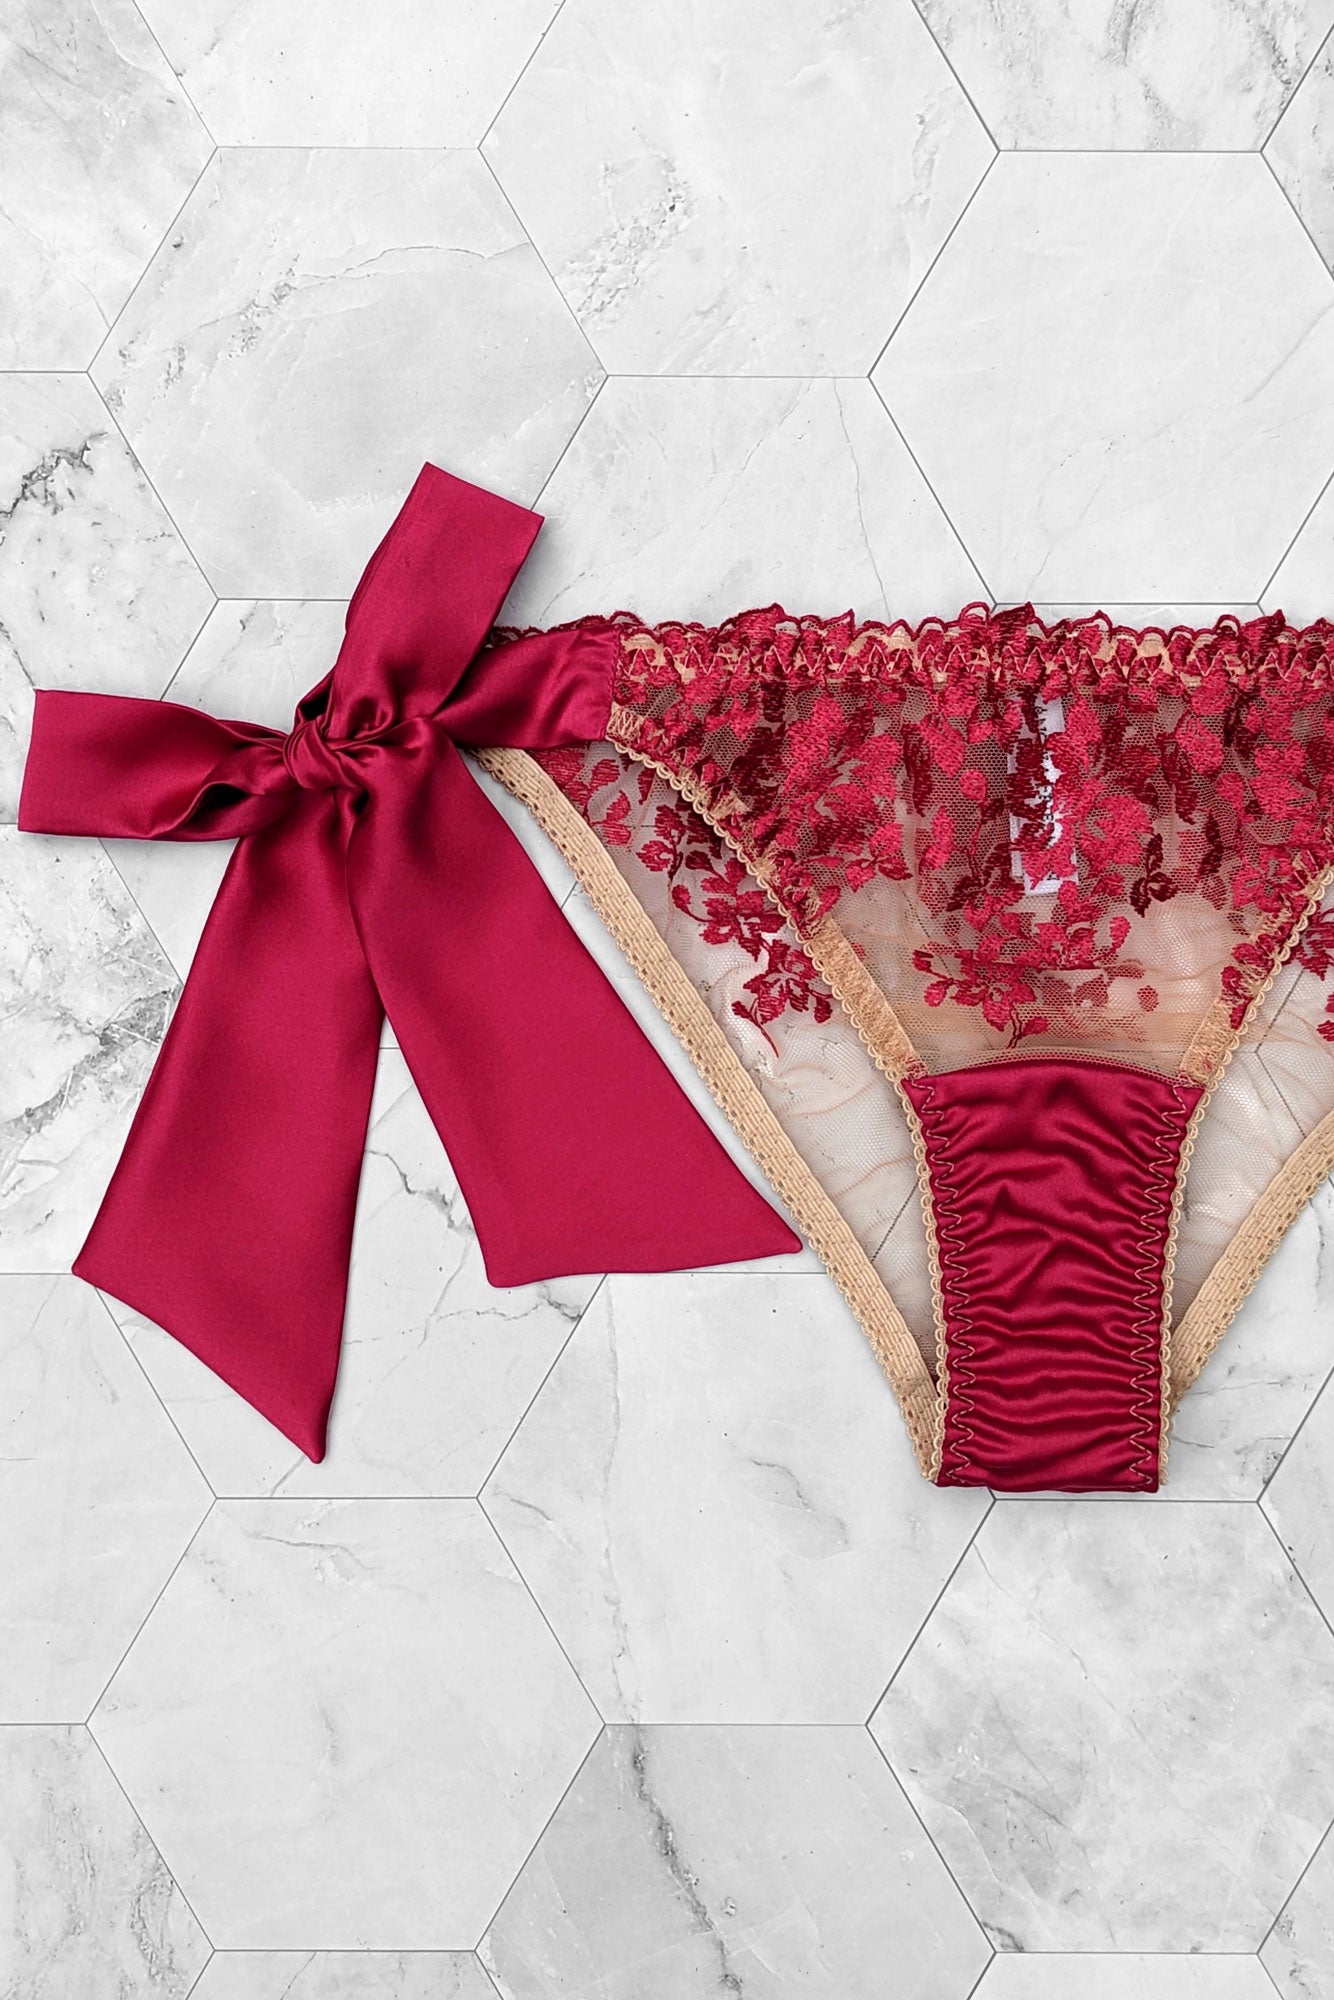 Silk underwear with red lace and satin bows